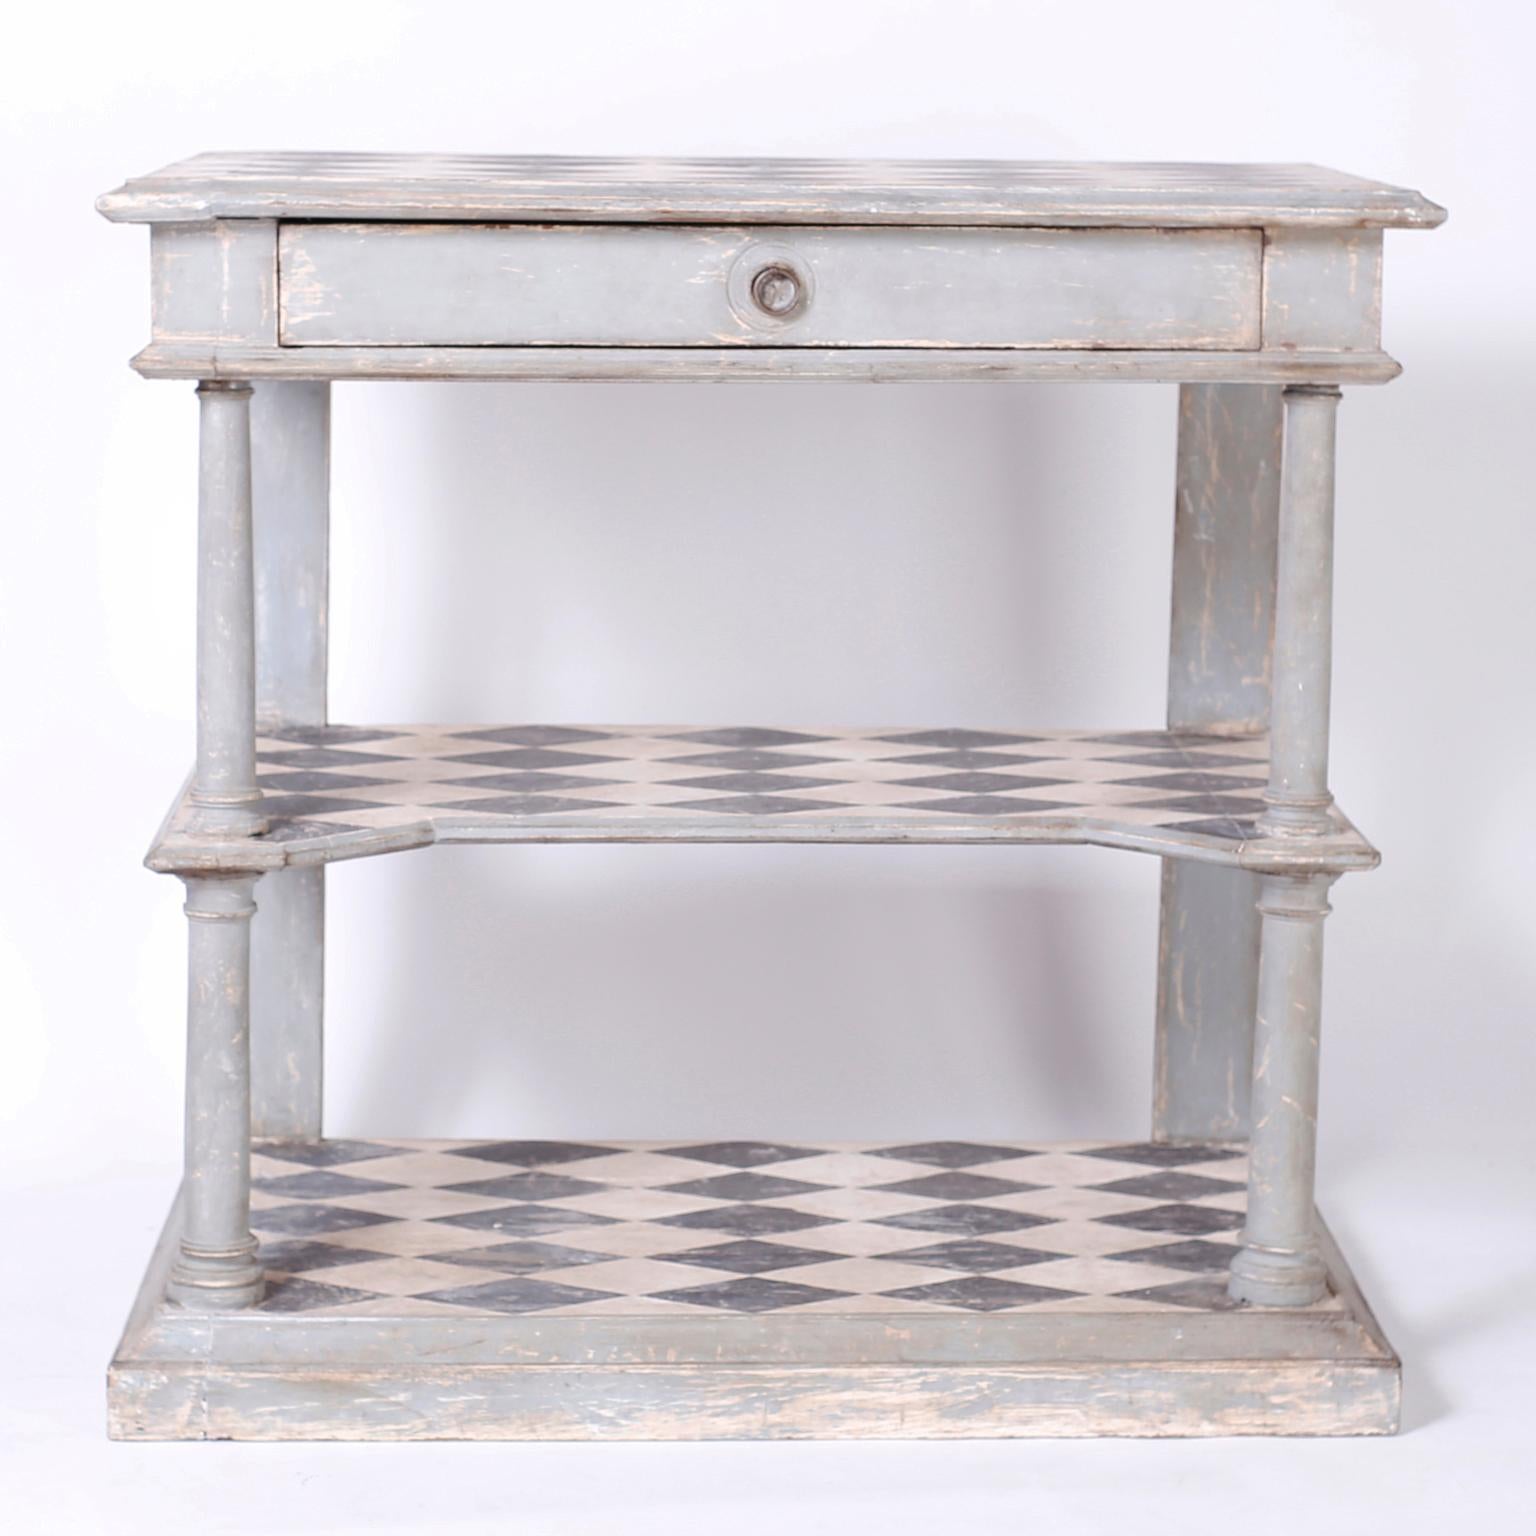 Neoclassical Pair of Early 19th Century Three-Tiered Servers or Consoles For Sale